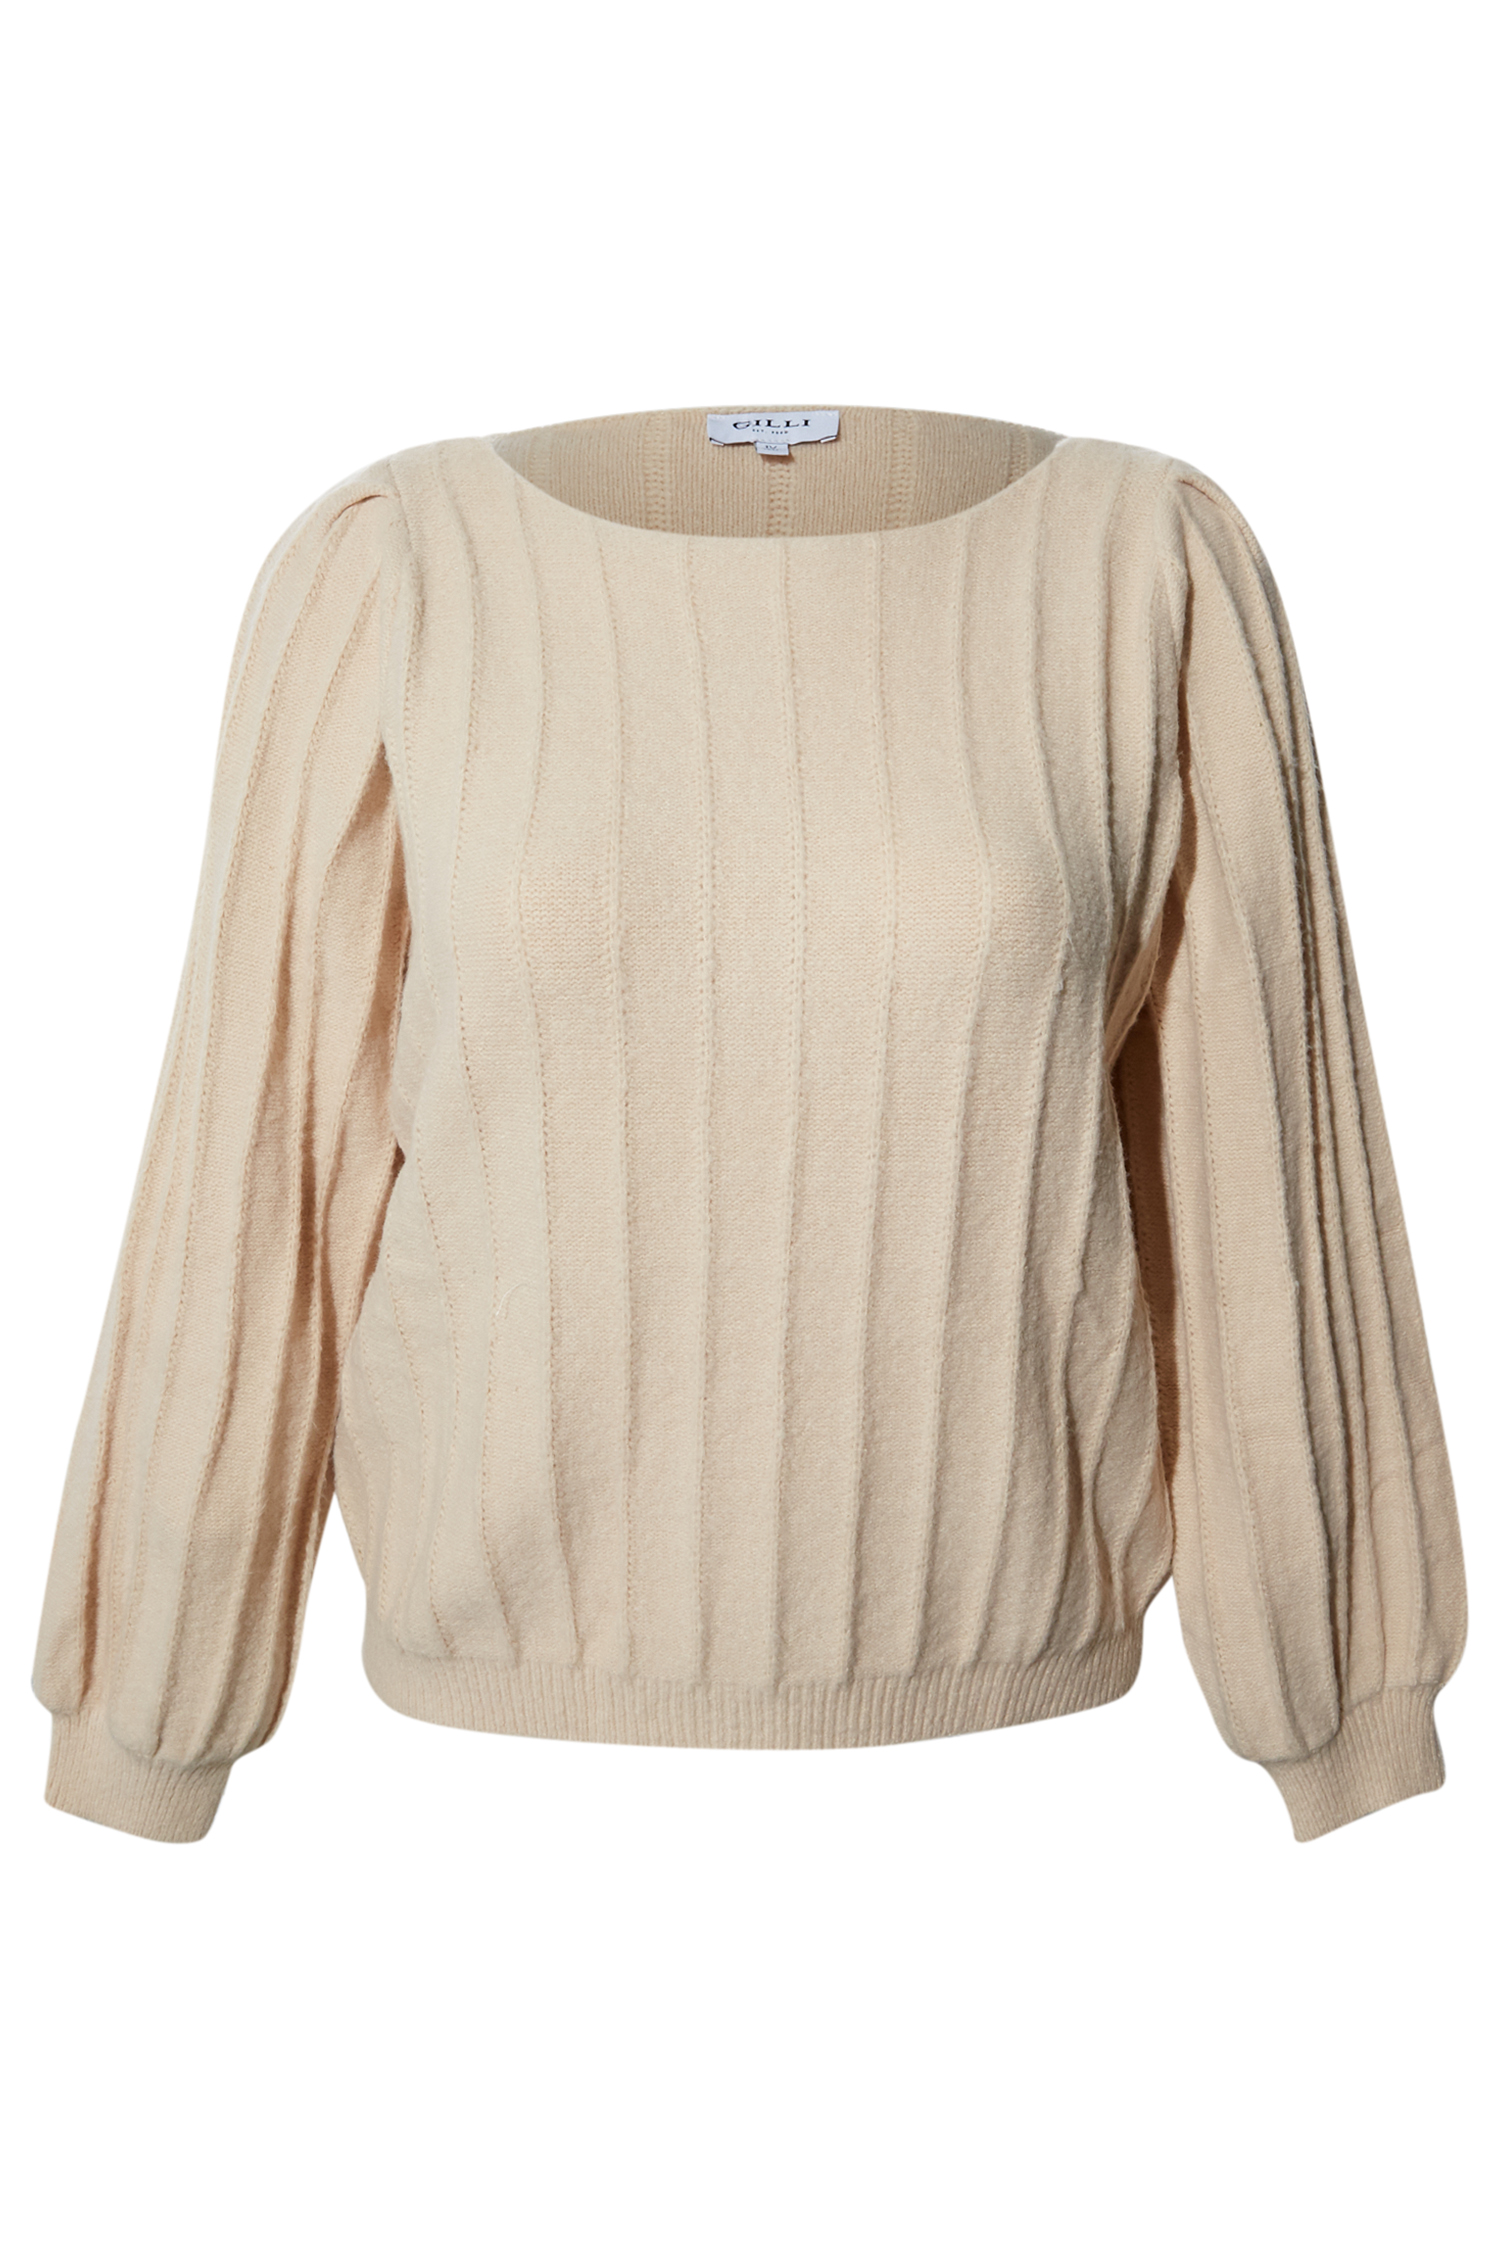 Ribbed Pointelle Knit Sweater in Taupe 2X